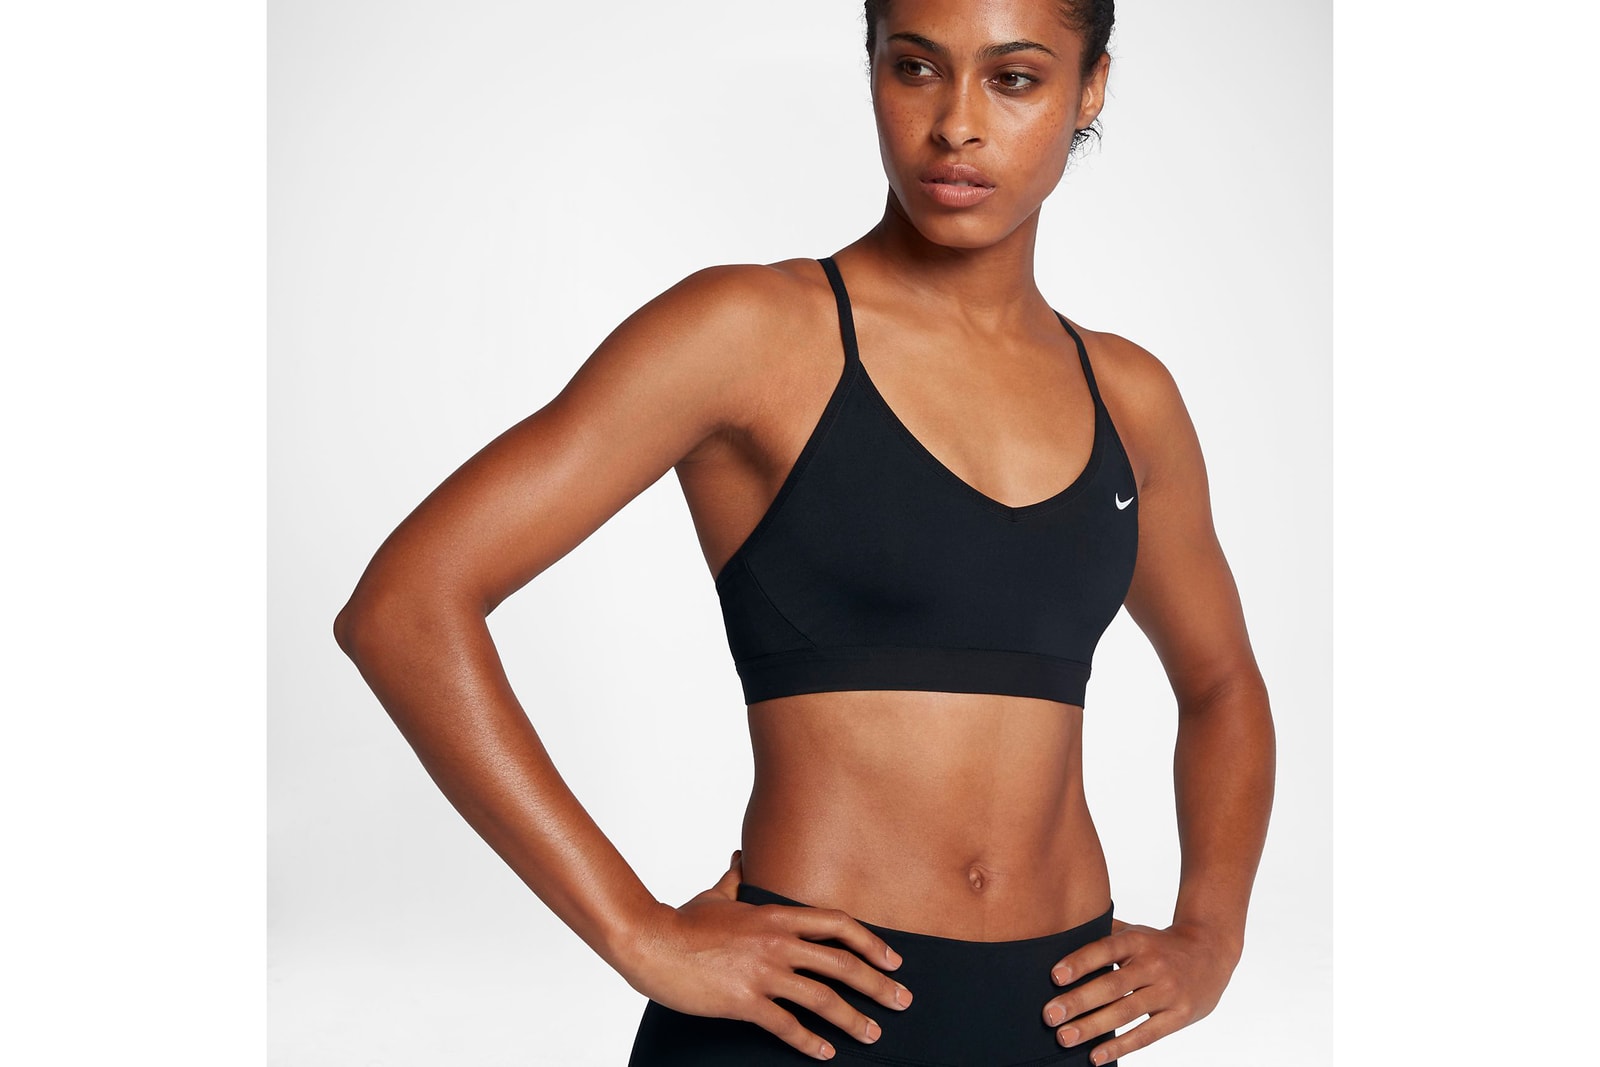 How To Look Stylish In Workout Gear Editors Guide Inspiration Workout Fitspo Nike adidas Alexander Wang Running Uniqlo Swell Water Bottle Kara Lululemon Victorias Secret